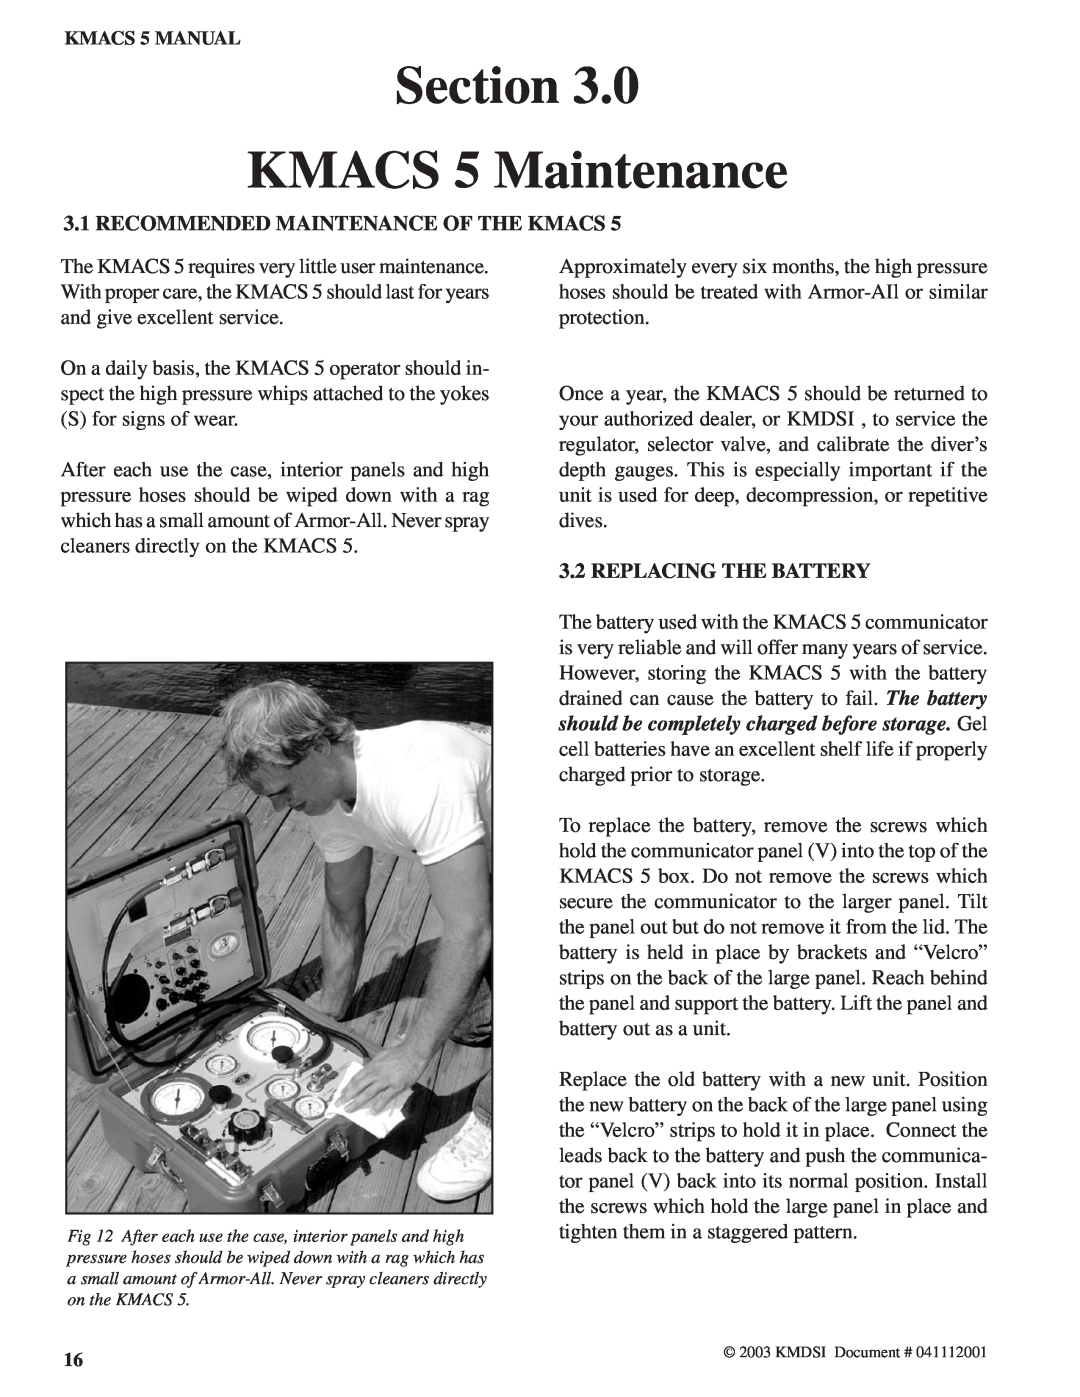 Kirby Air Control System manual Section KMACS 5 Maintenance, Recommended Maintenance Of The Kmacs, Replacing The Battery 